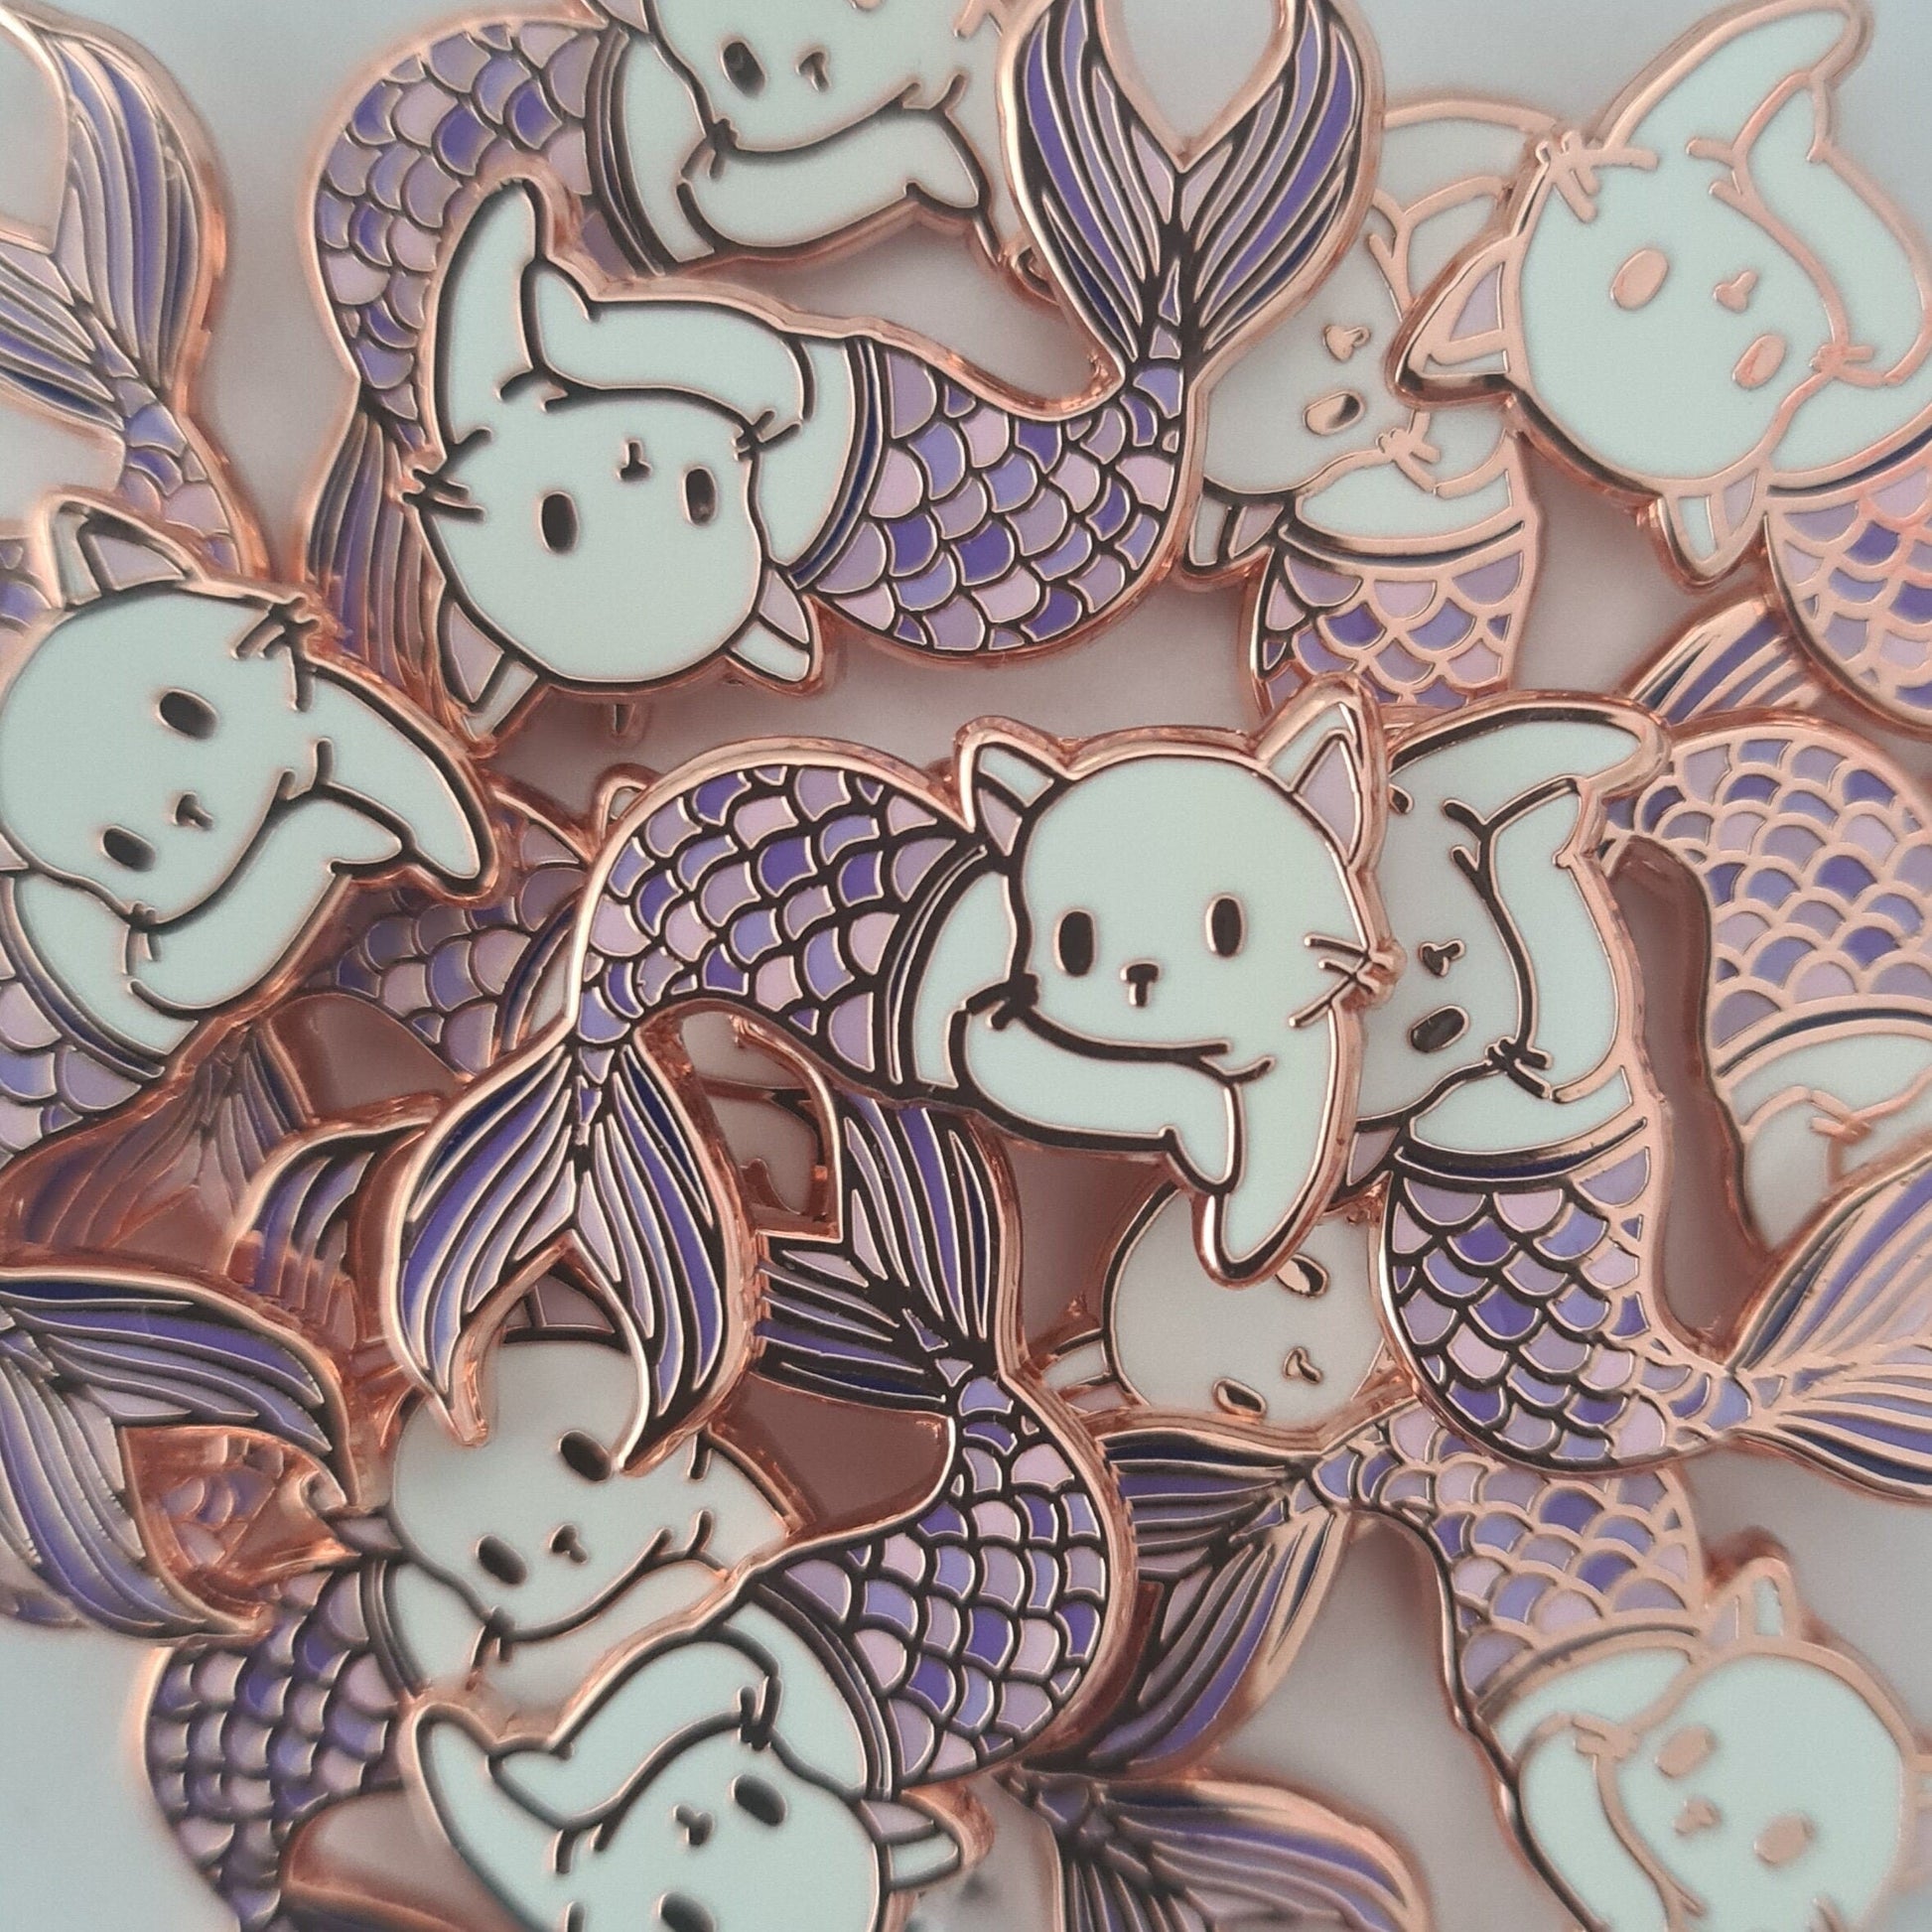 Purrmaid IV, White Cat with Purple/Mauve Mermaid Tail - Small 1&quot; Enamel Pin, Pins, Brooches & Lapel Pins